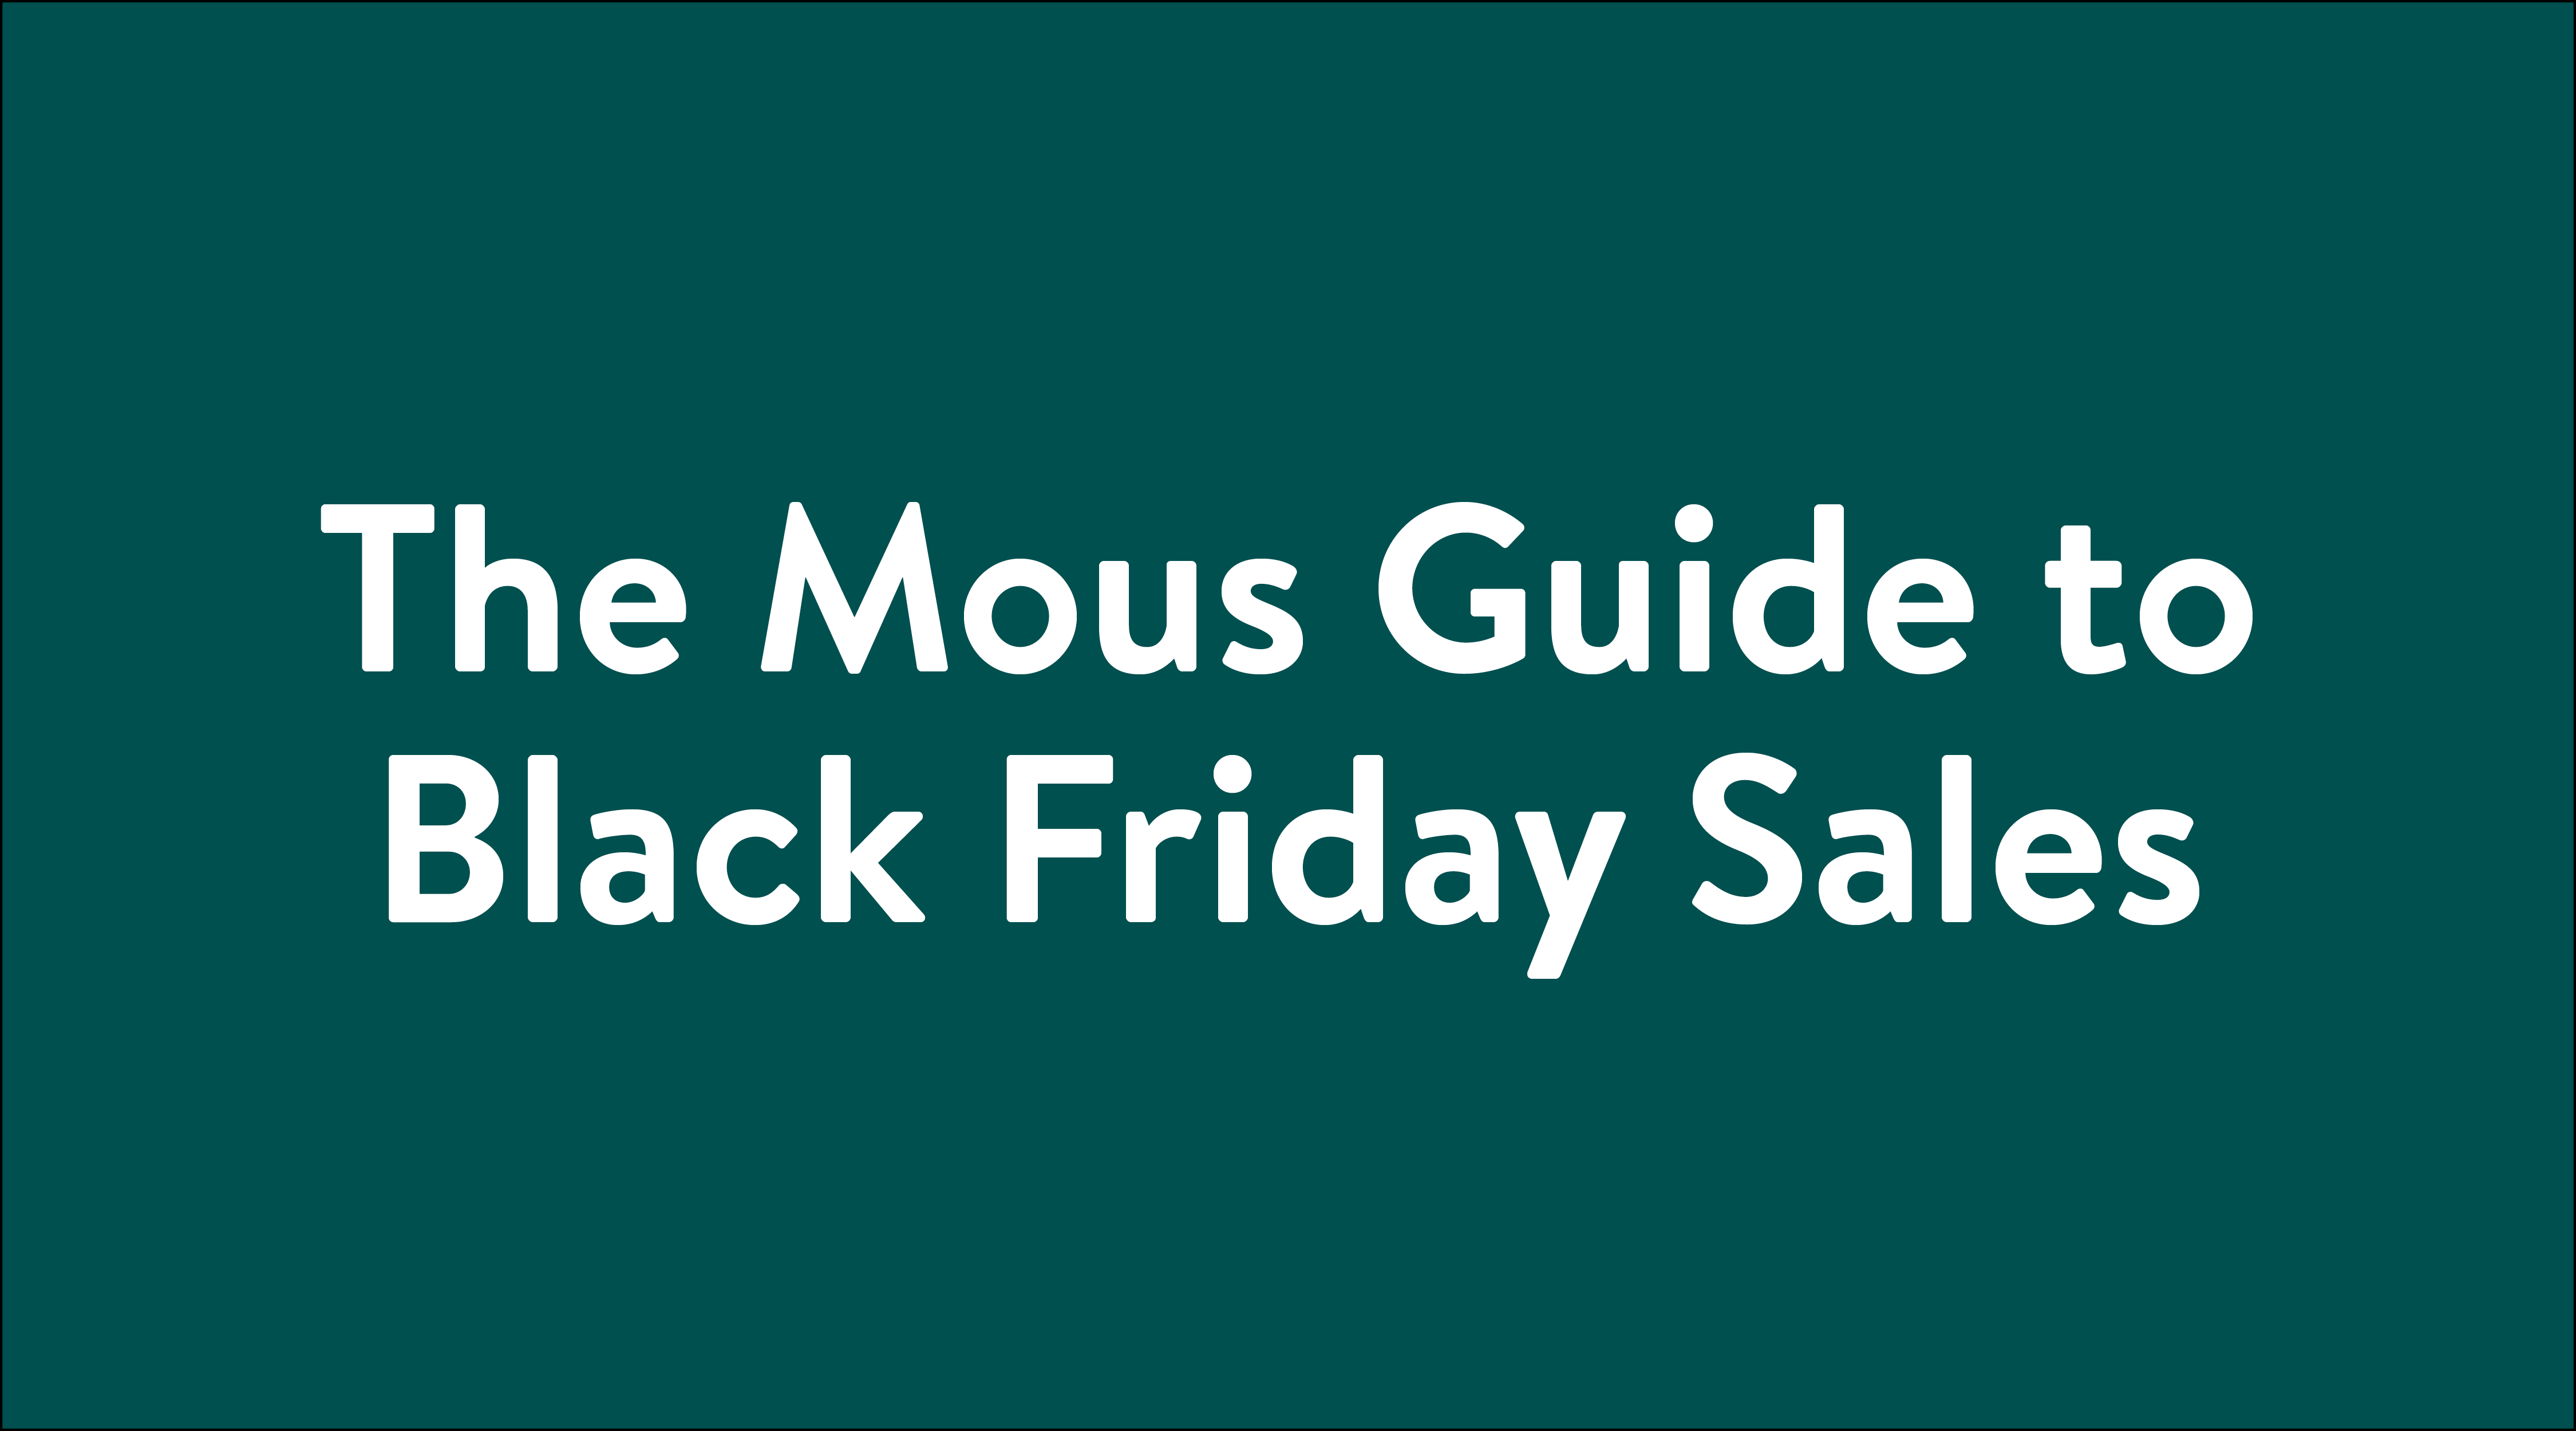 The Mous Guide to Black Friday Sales typography